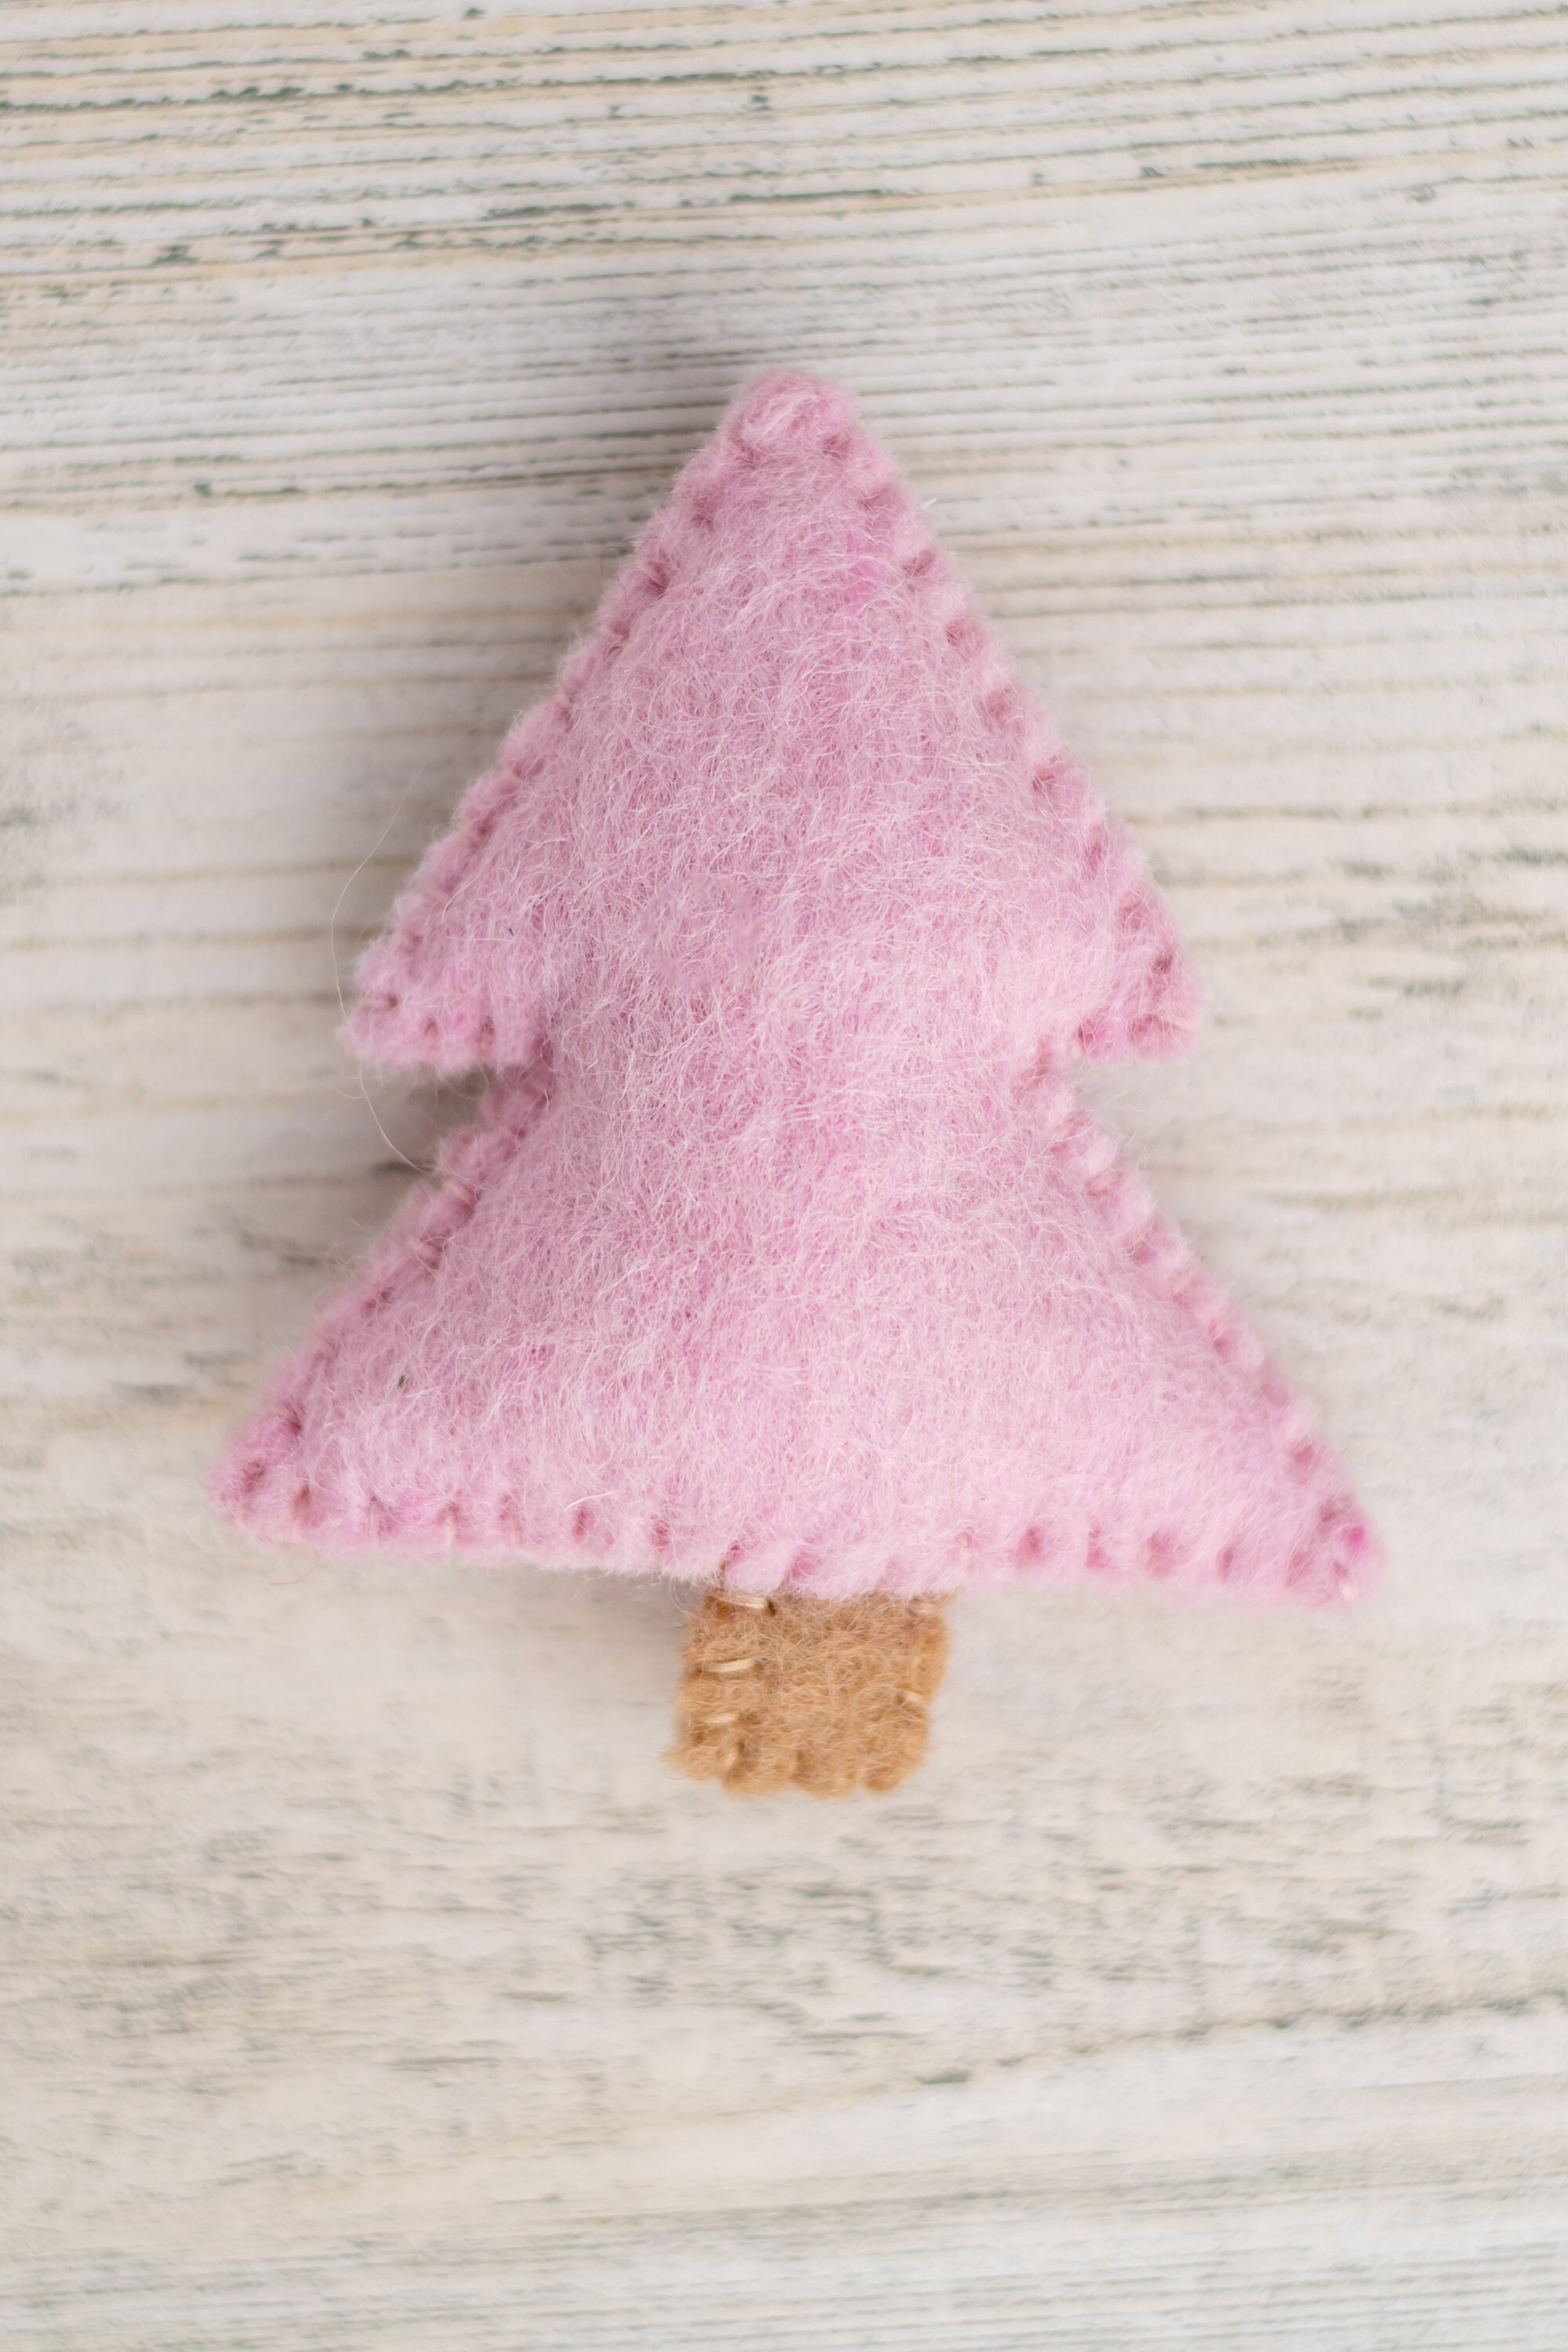 DIY Felt Christmas Tree Ornaments – English Rose from Manchester's